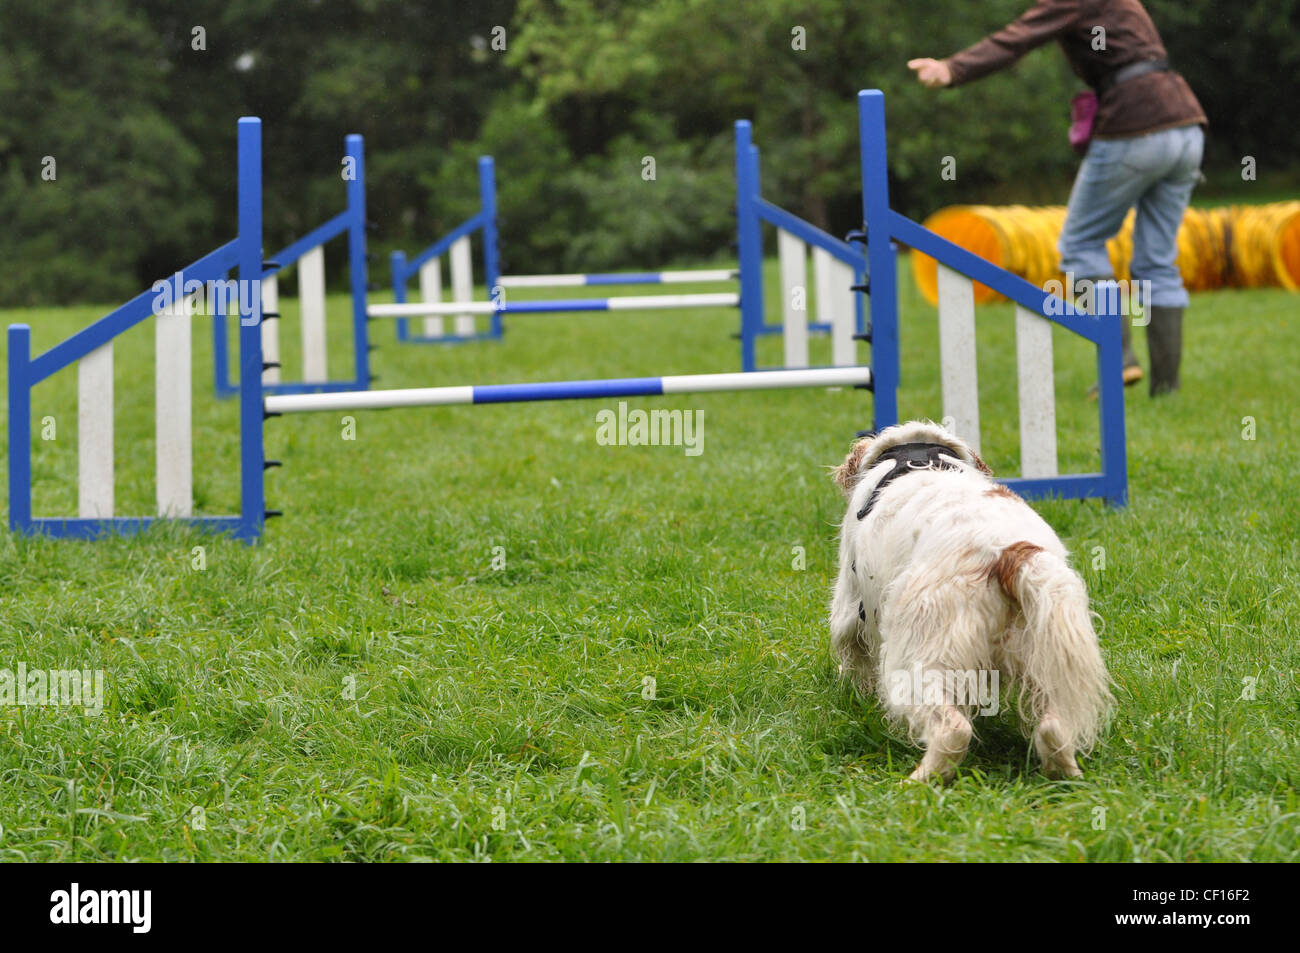 Clumber spaniel getting ready to do an agility course Stock Photo